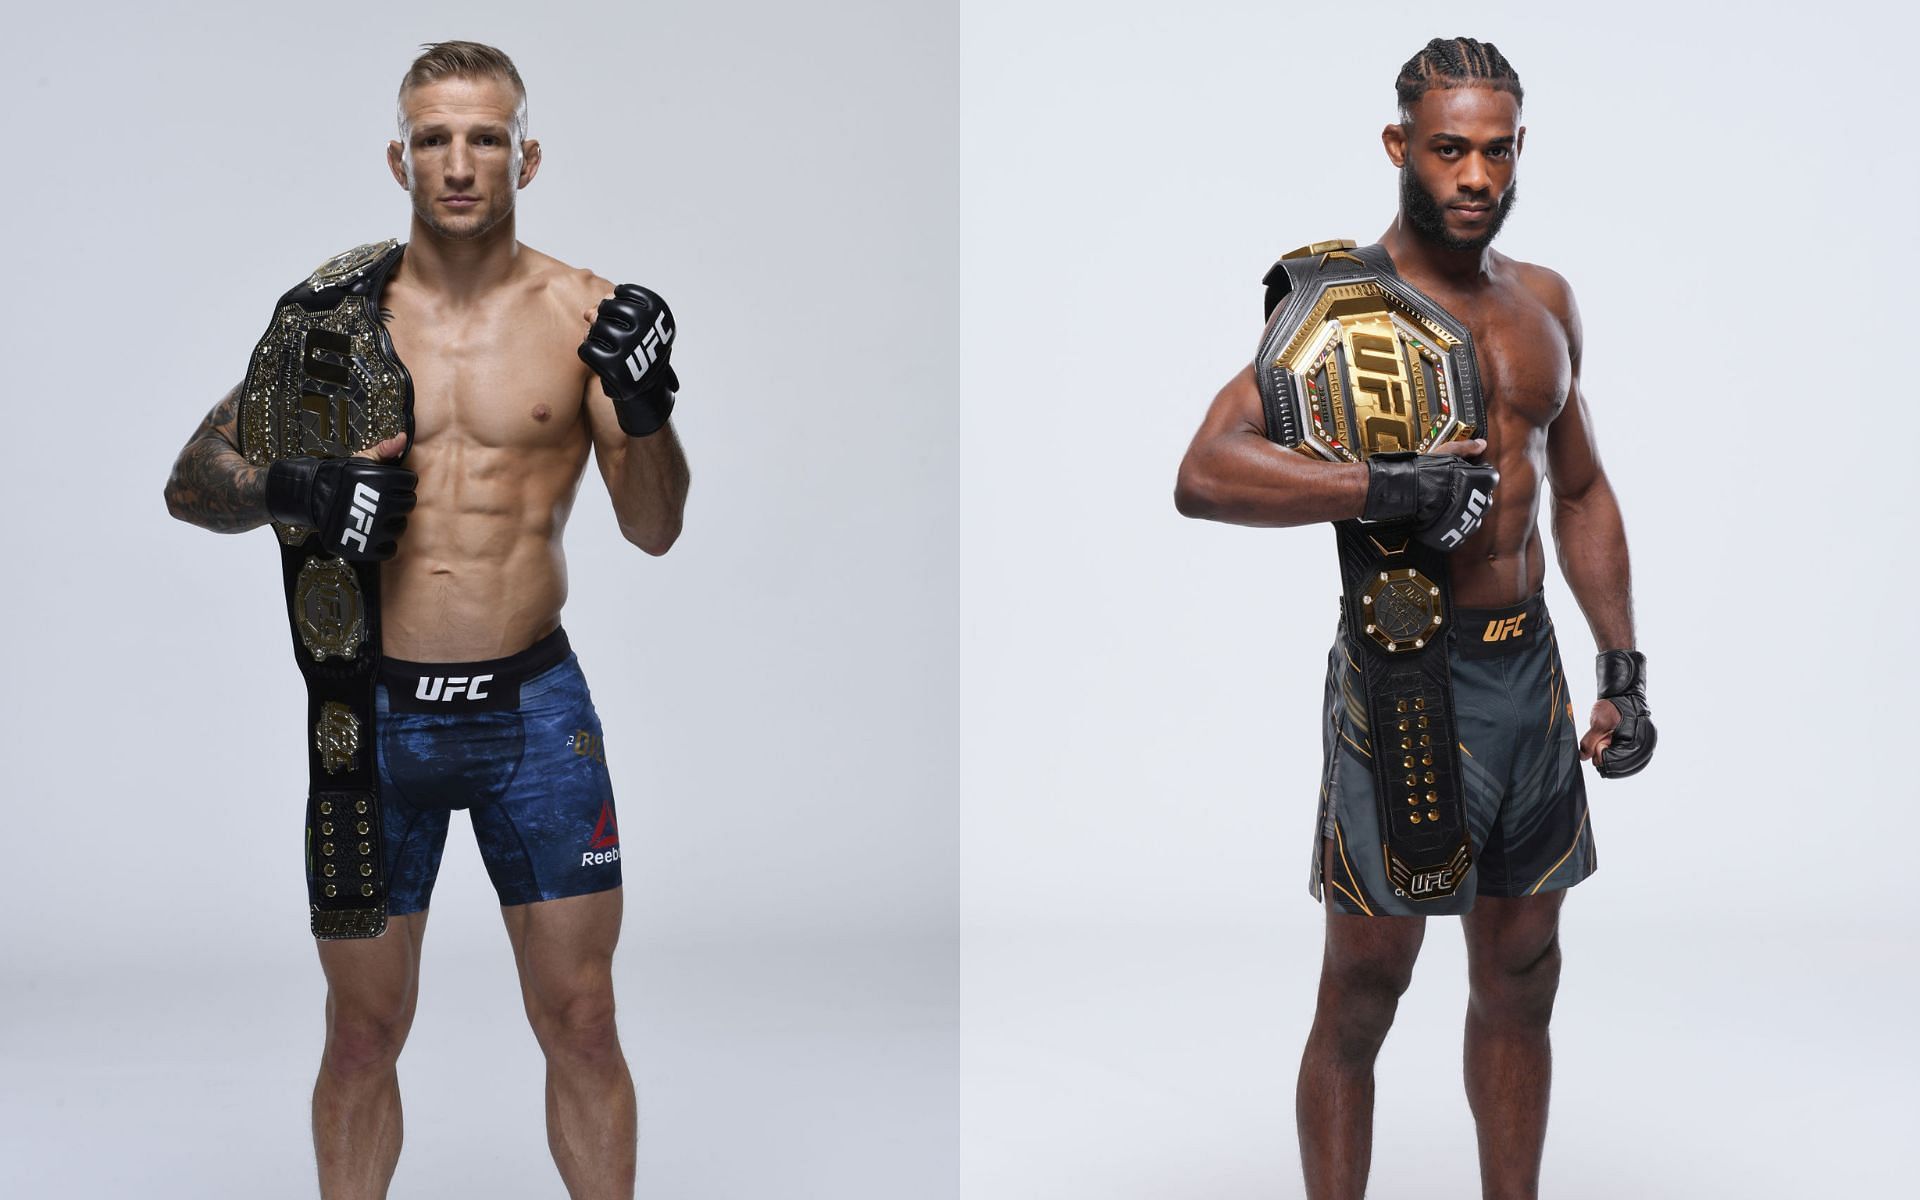 TJ Dillashaw (left) and Aljamain Sterling (right)